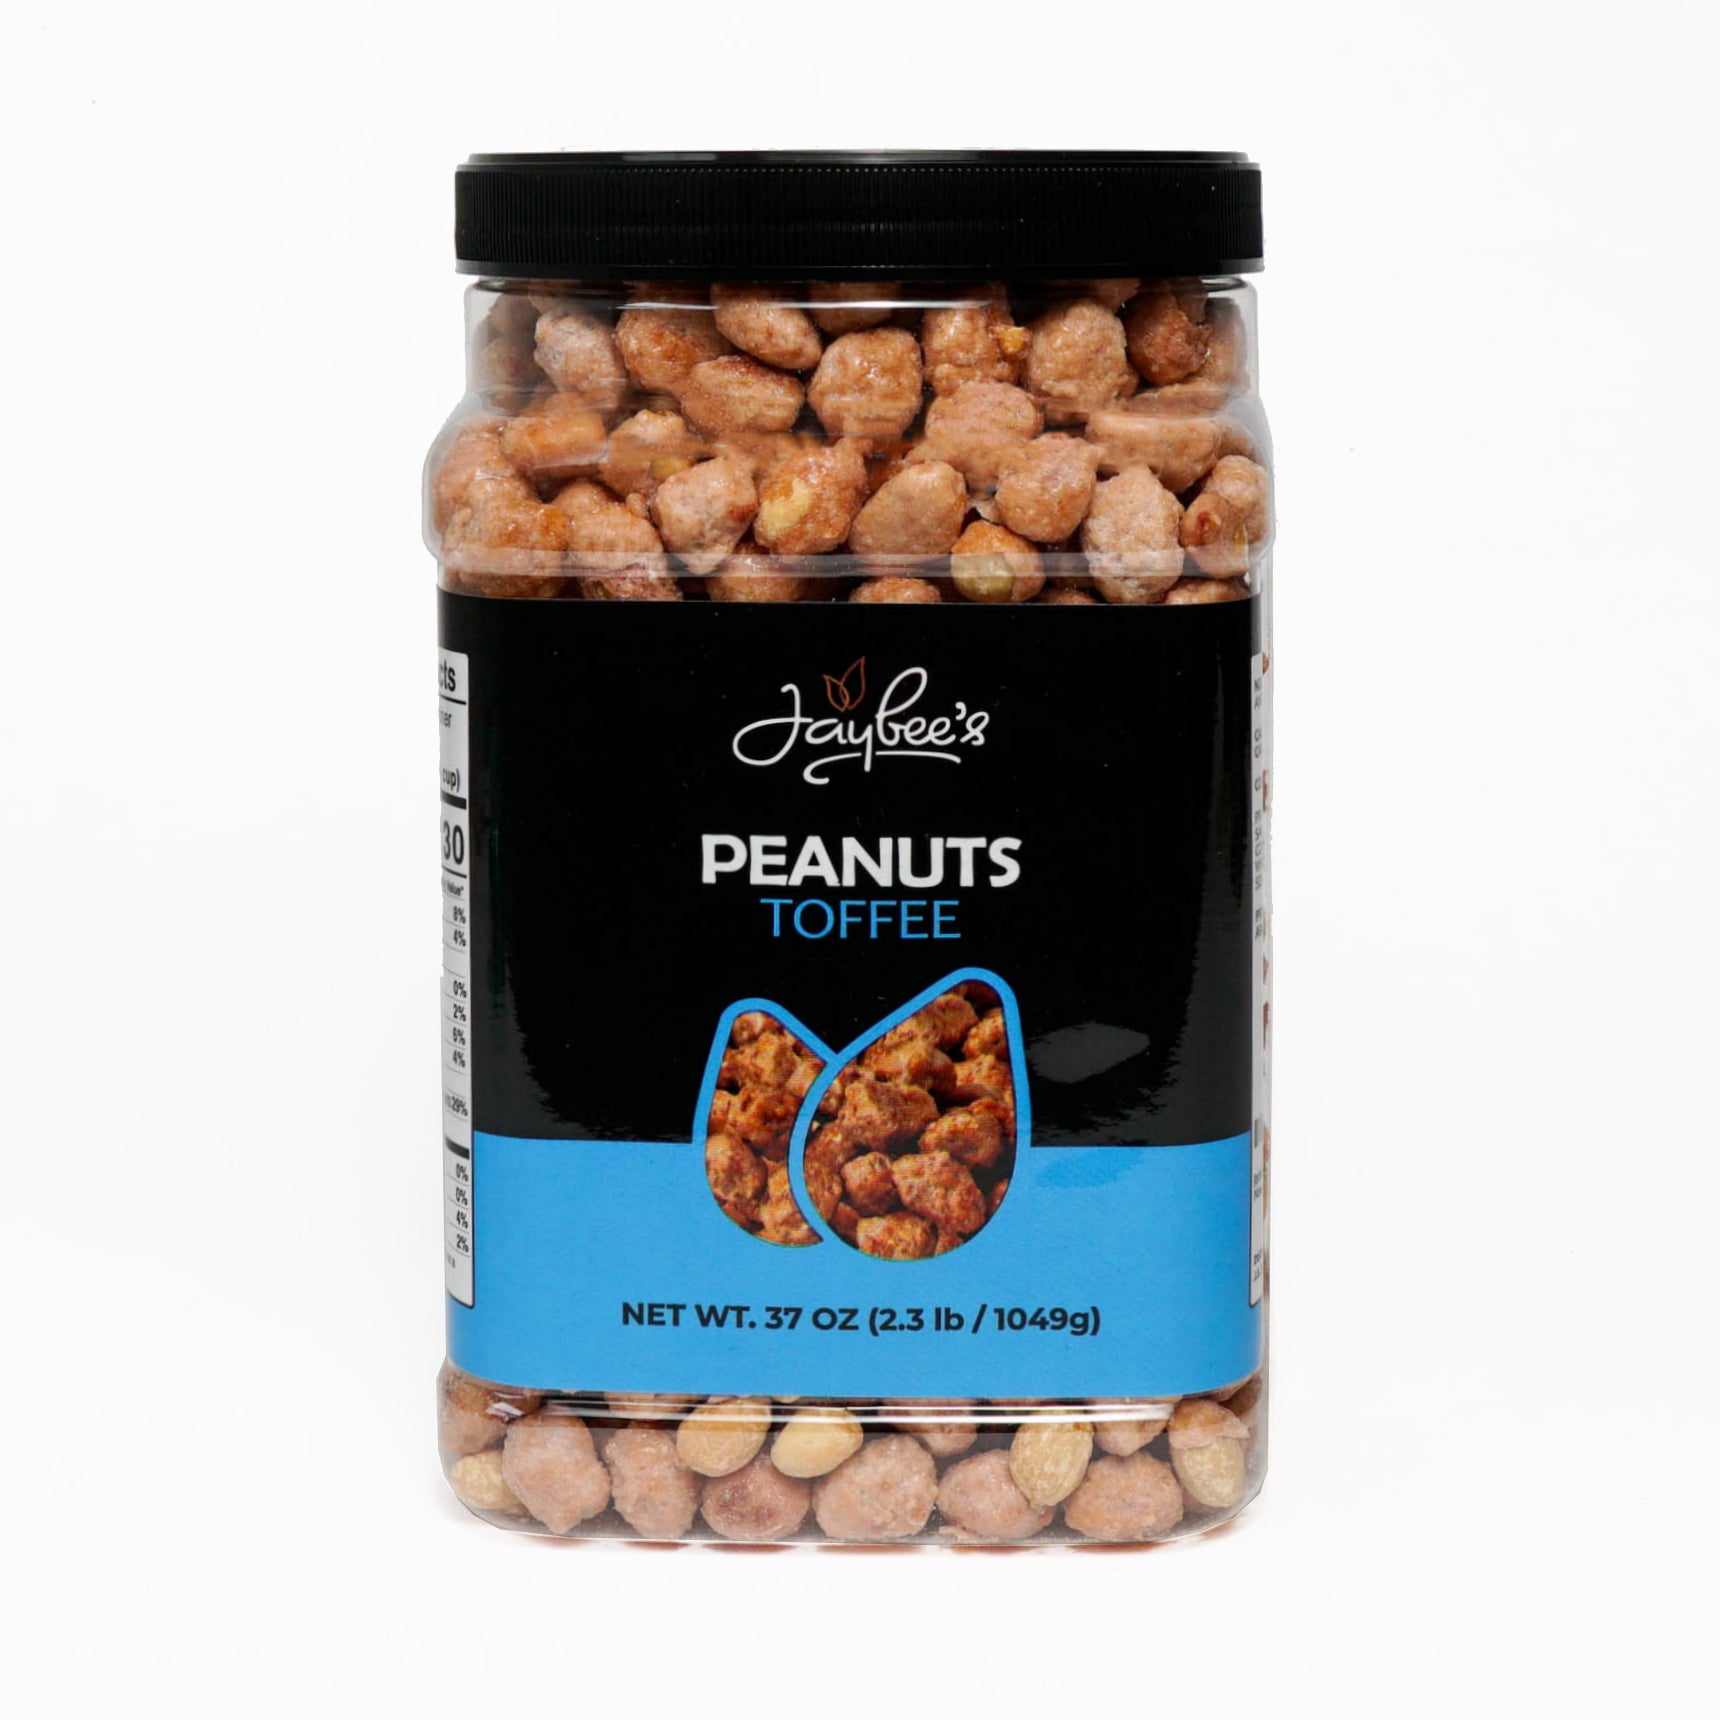 Peanuts - Toffee Covered